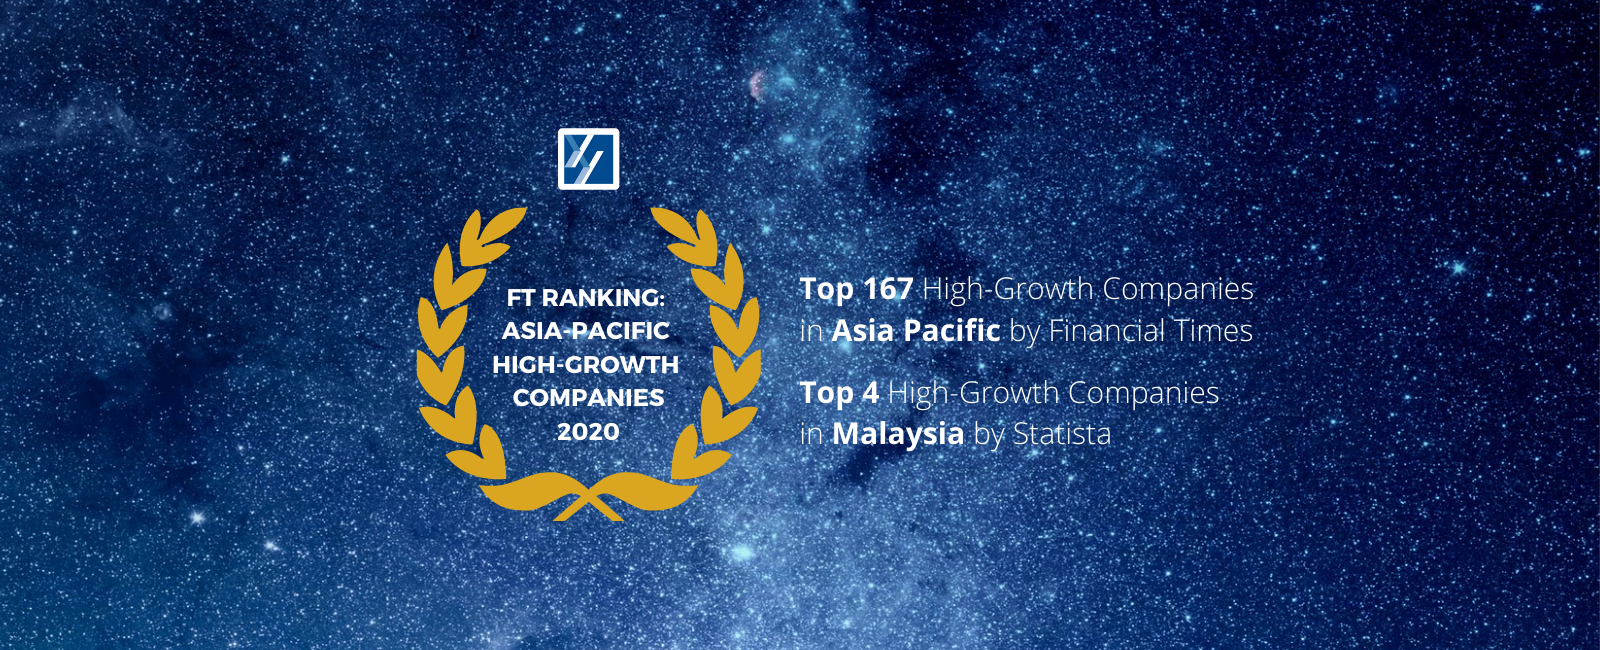 YNY Technology recognized by Financial Times as High-Growth Companies in Asia-Pacific 2020